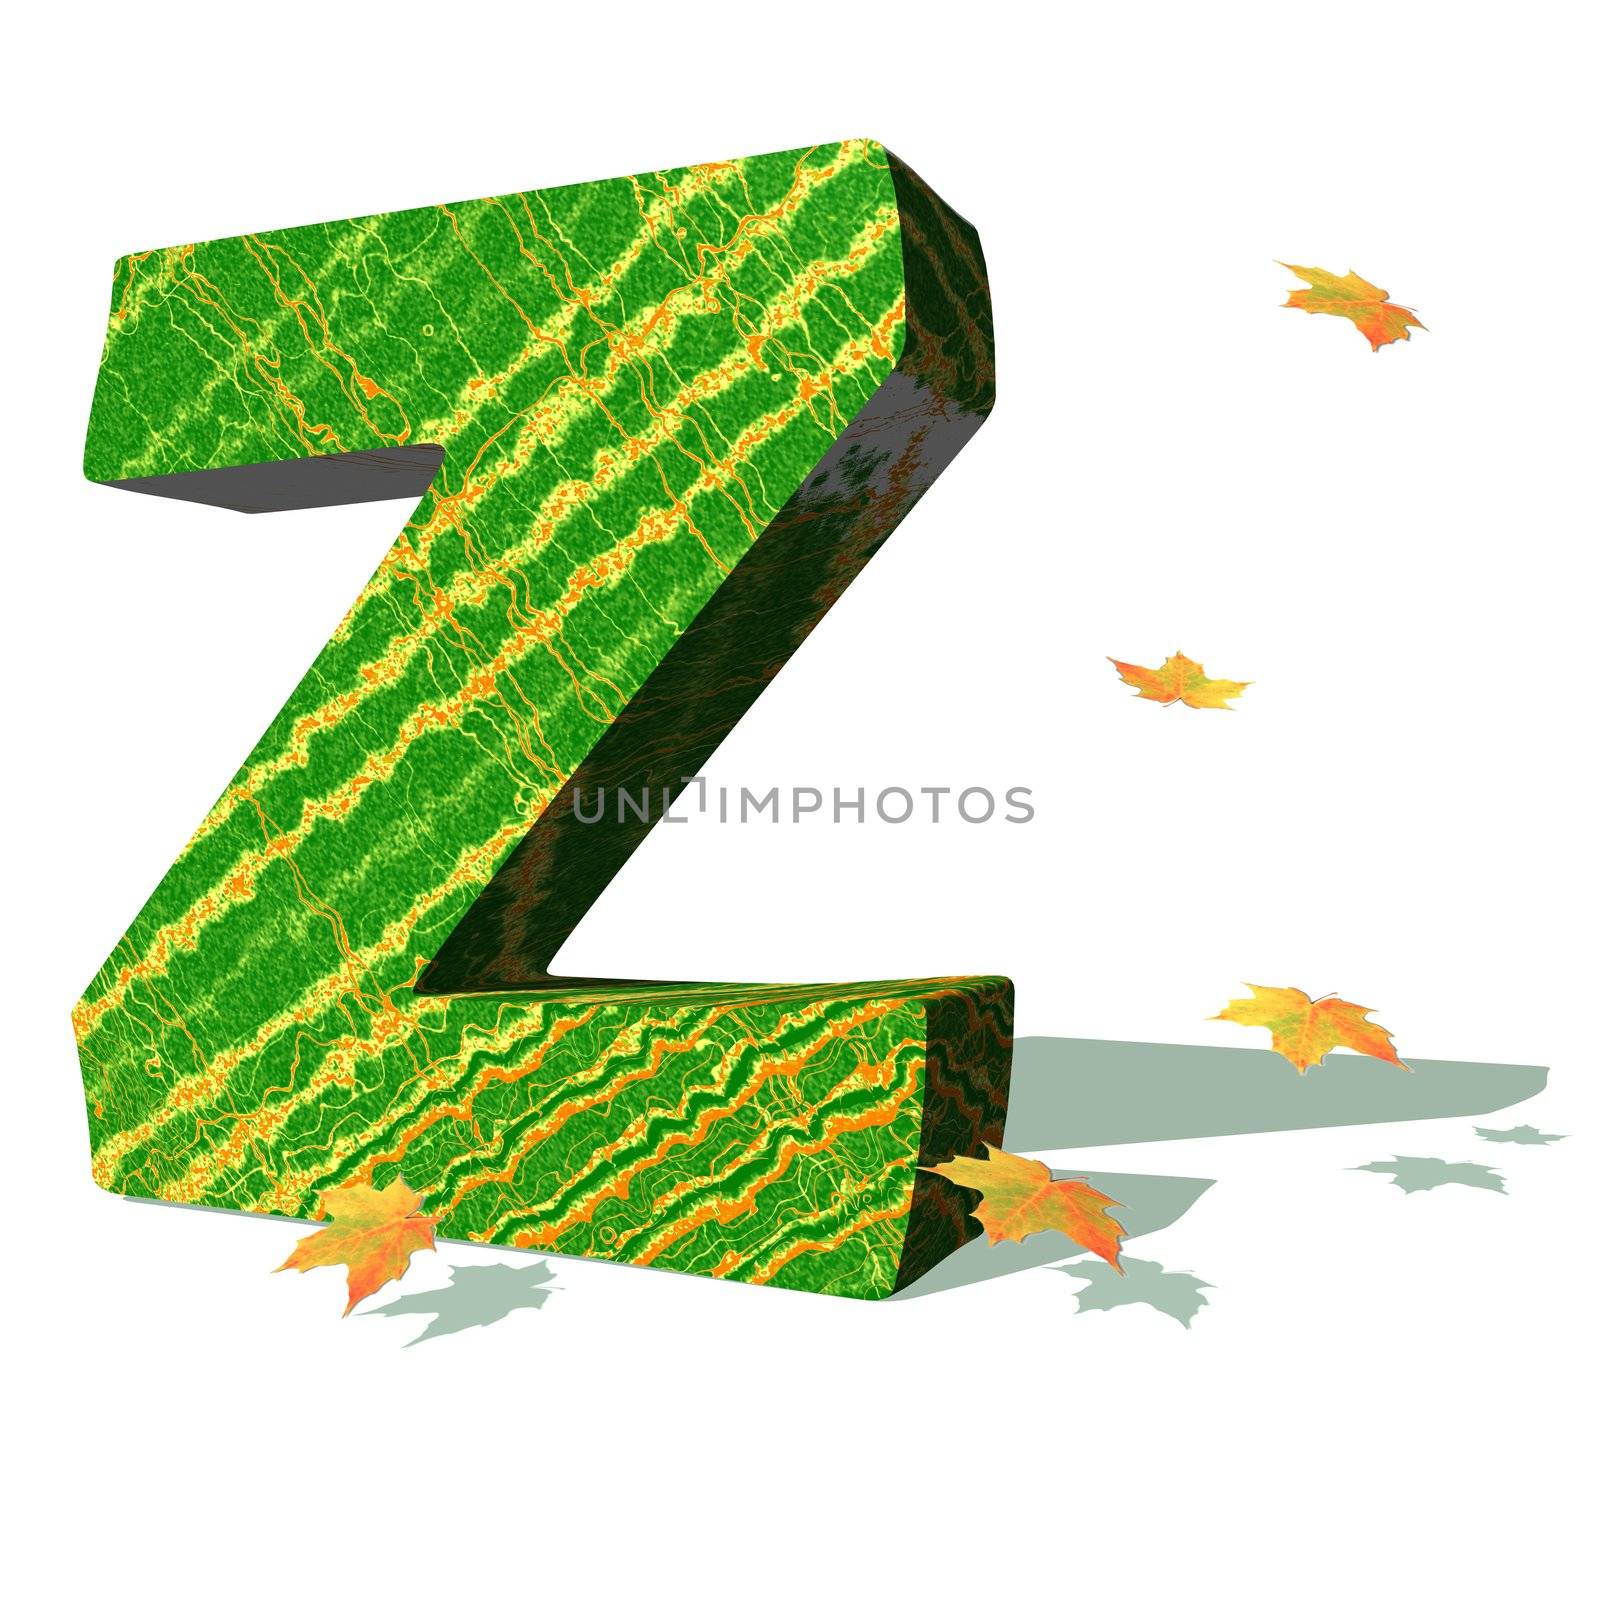 Green ecological Z capital letter surrounded by few autumn falling leaves in a white background with shadows